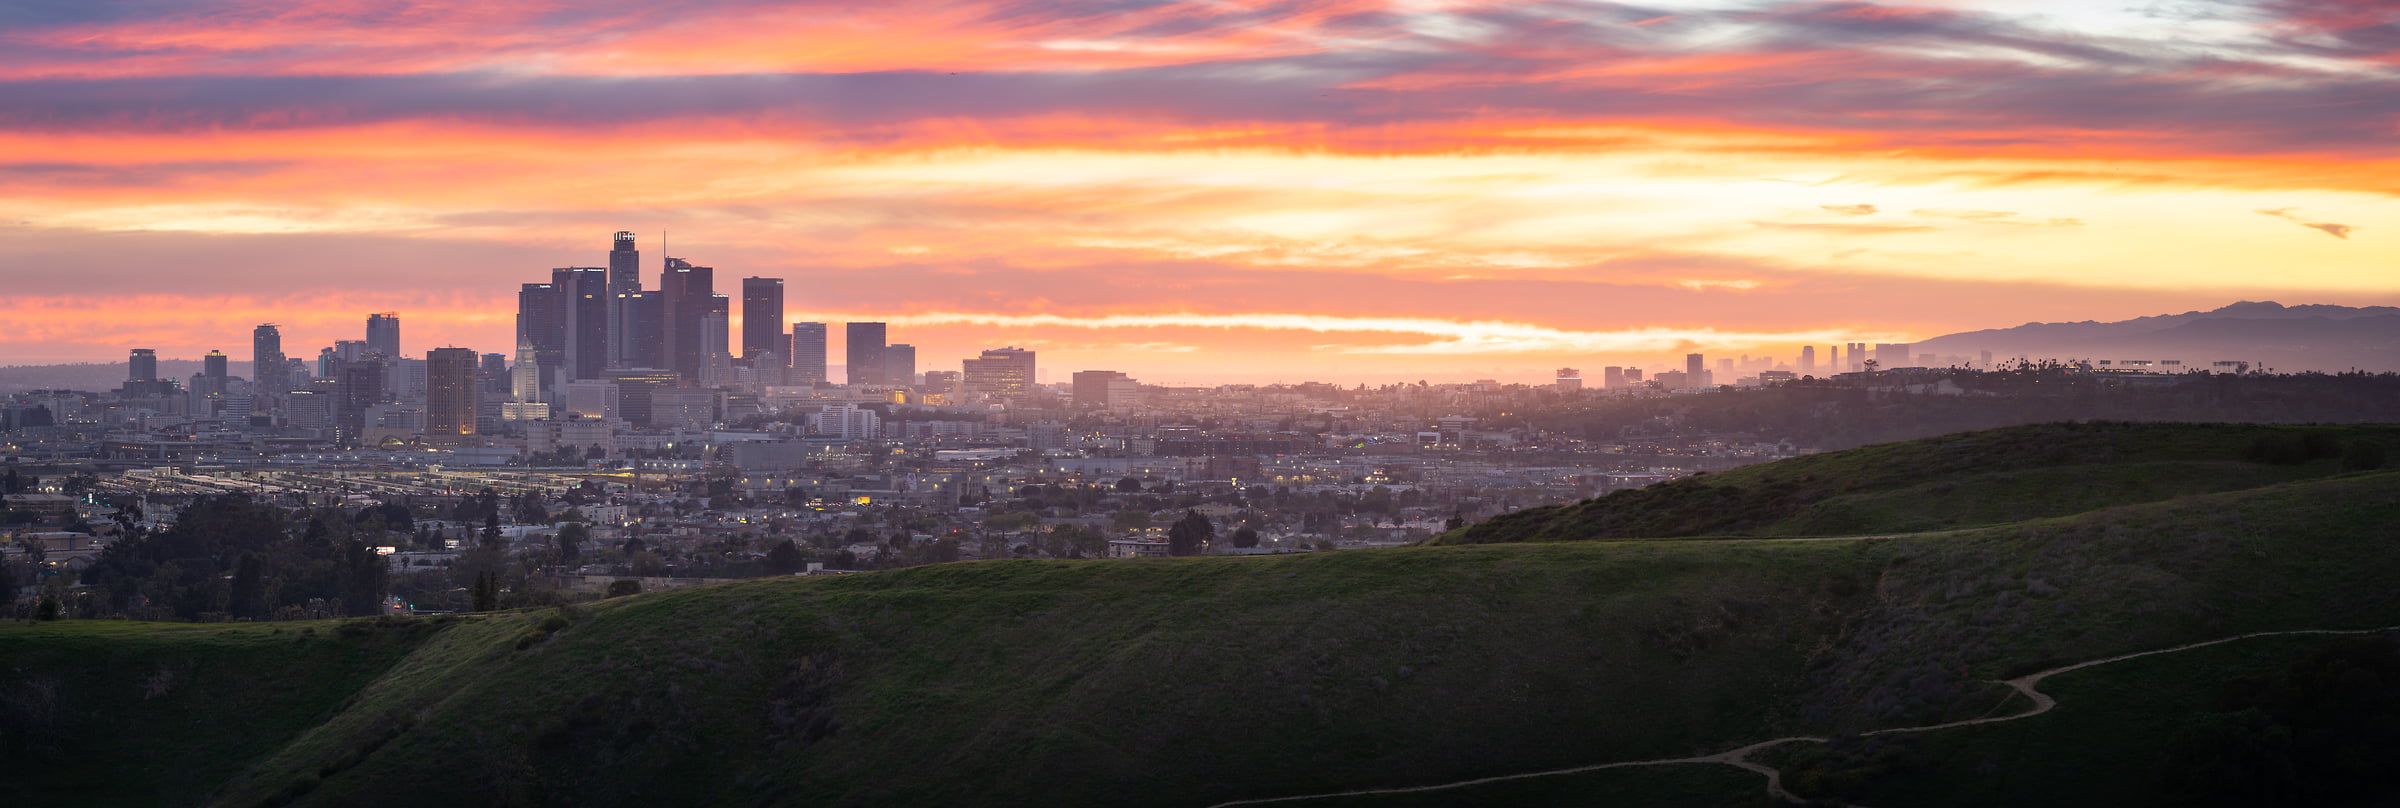 349 megapixels! A very high resolution, large-format panorama photo of the Los Angeles skyline at sunset; cityscape photograph created by Jeff Lewis in Los Angeles, California